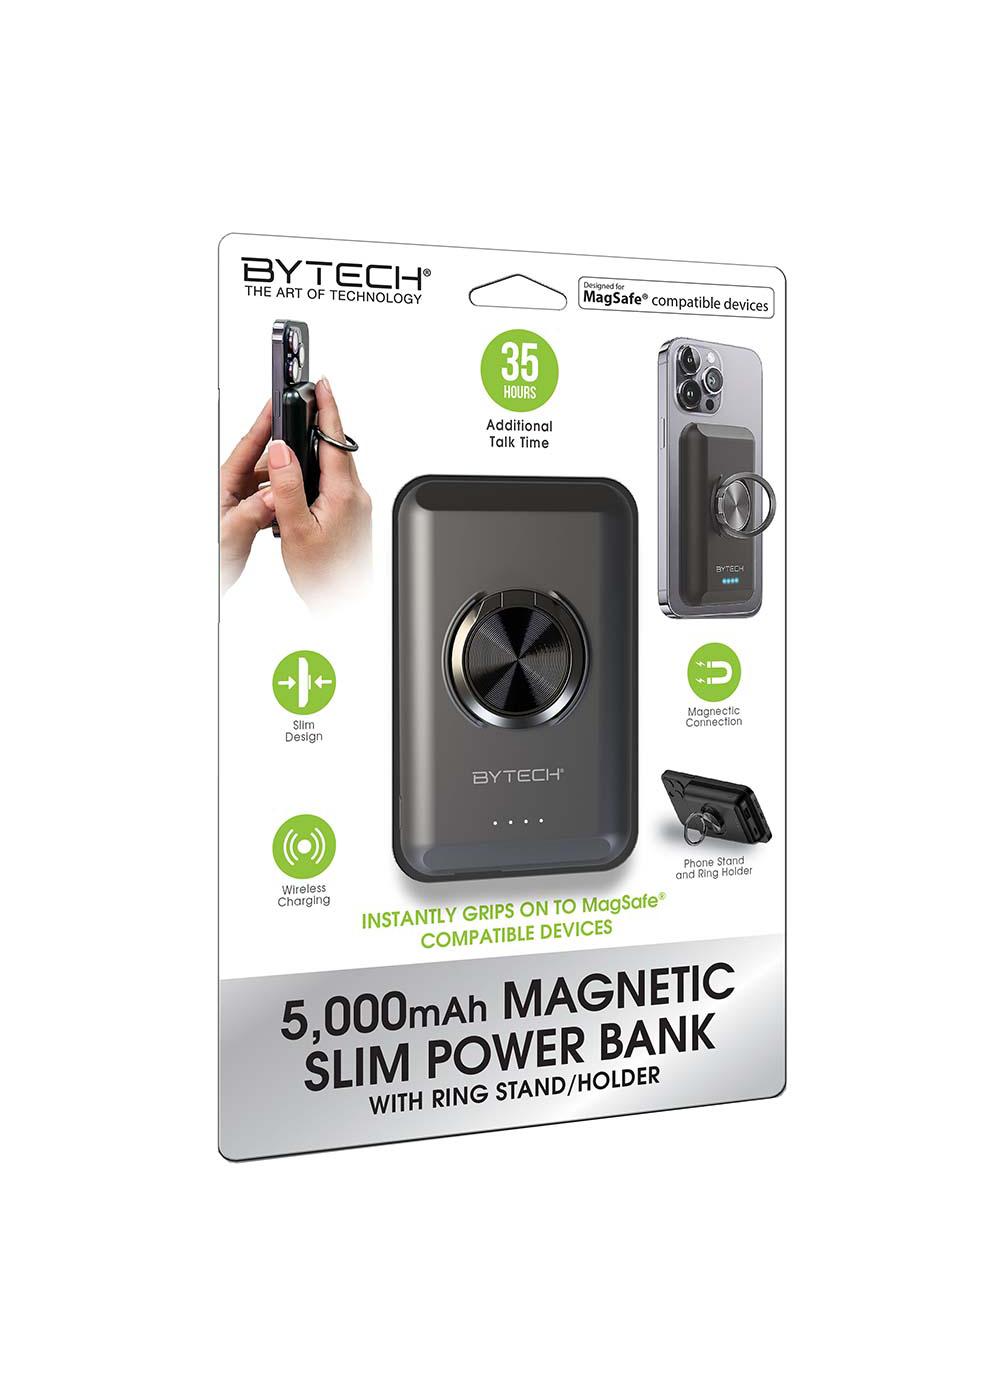 Bytech Magnetic Slim Power Bank with Ring Stand - Black; image 1 of 2